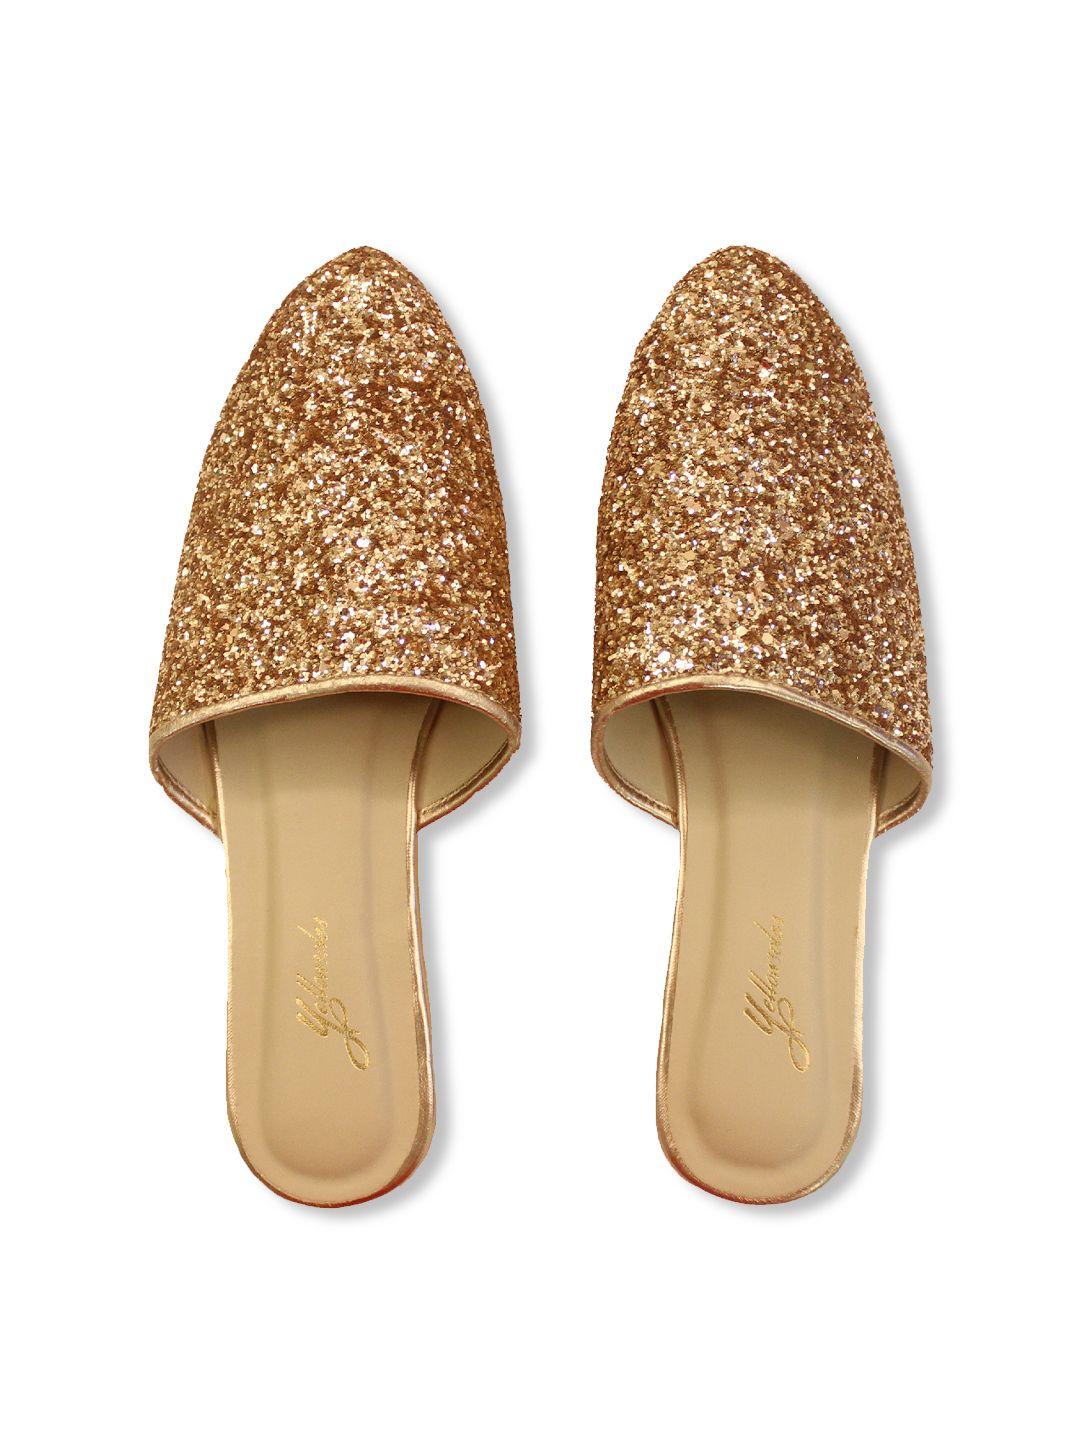 yellowsoles women rose gold embellished leather party mules flats